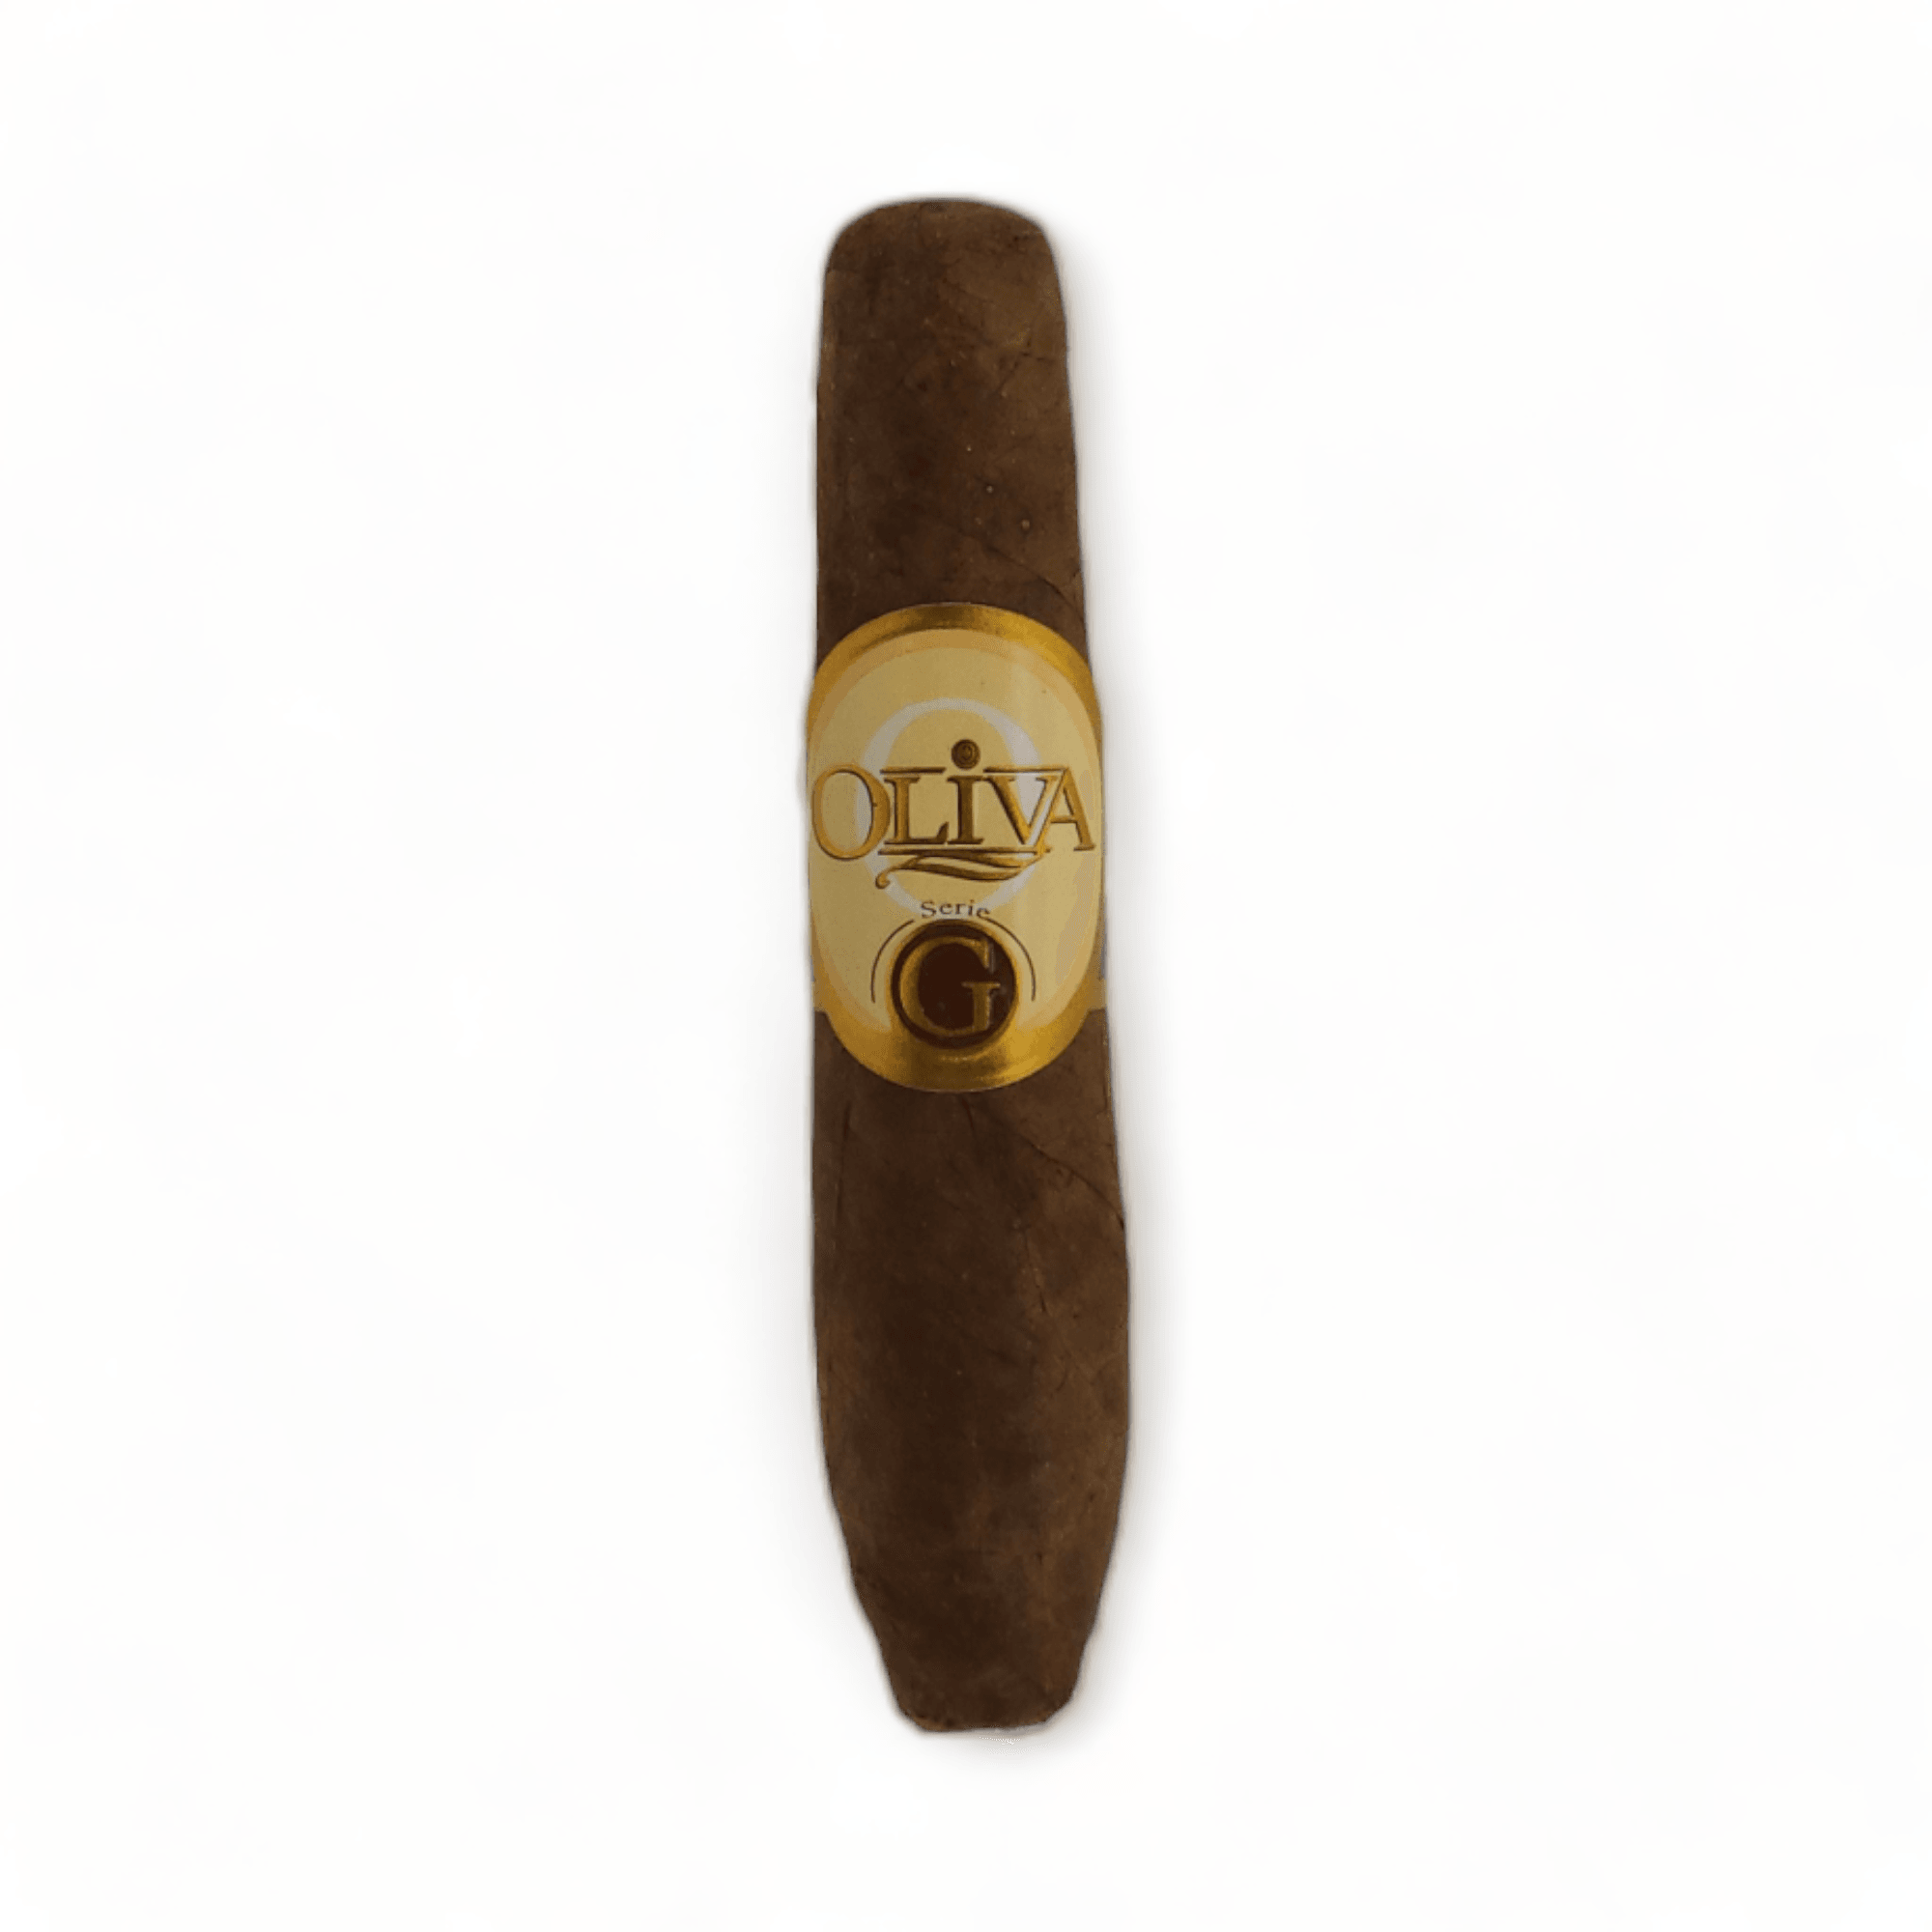 Oliva Serie G Aged Cameroon Special G Box 25 - hk.cohcigars